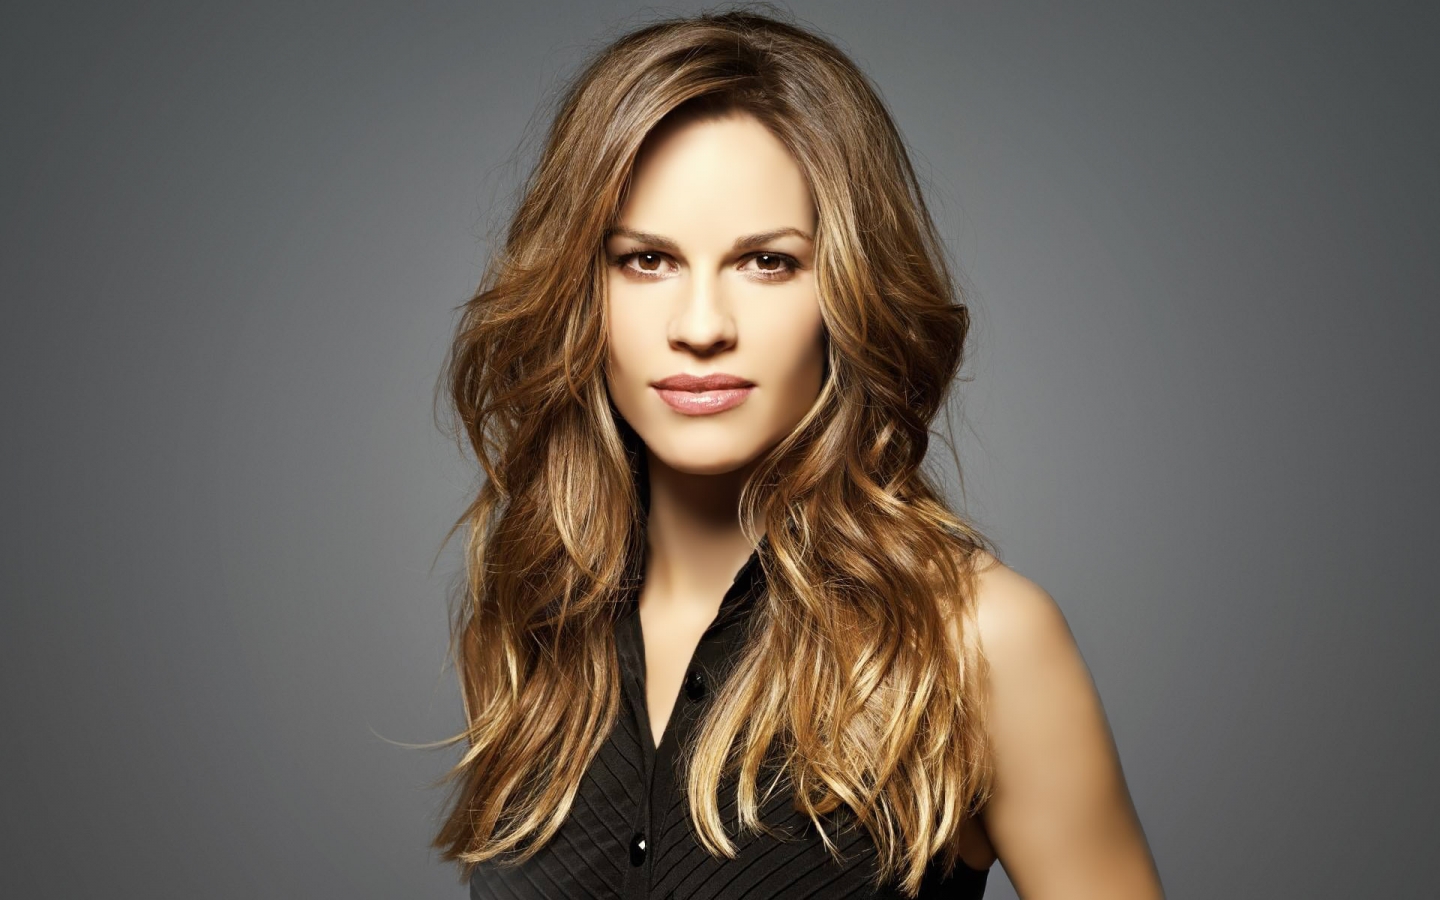 Gorgeous Hilary Swank for 1440 x 900 widescreen resolution